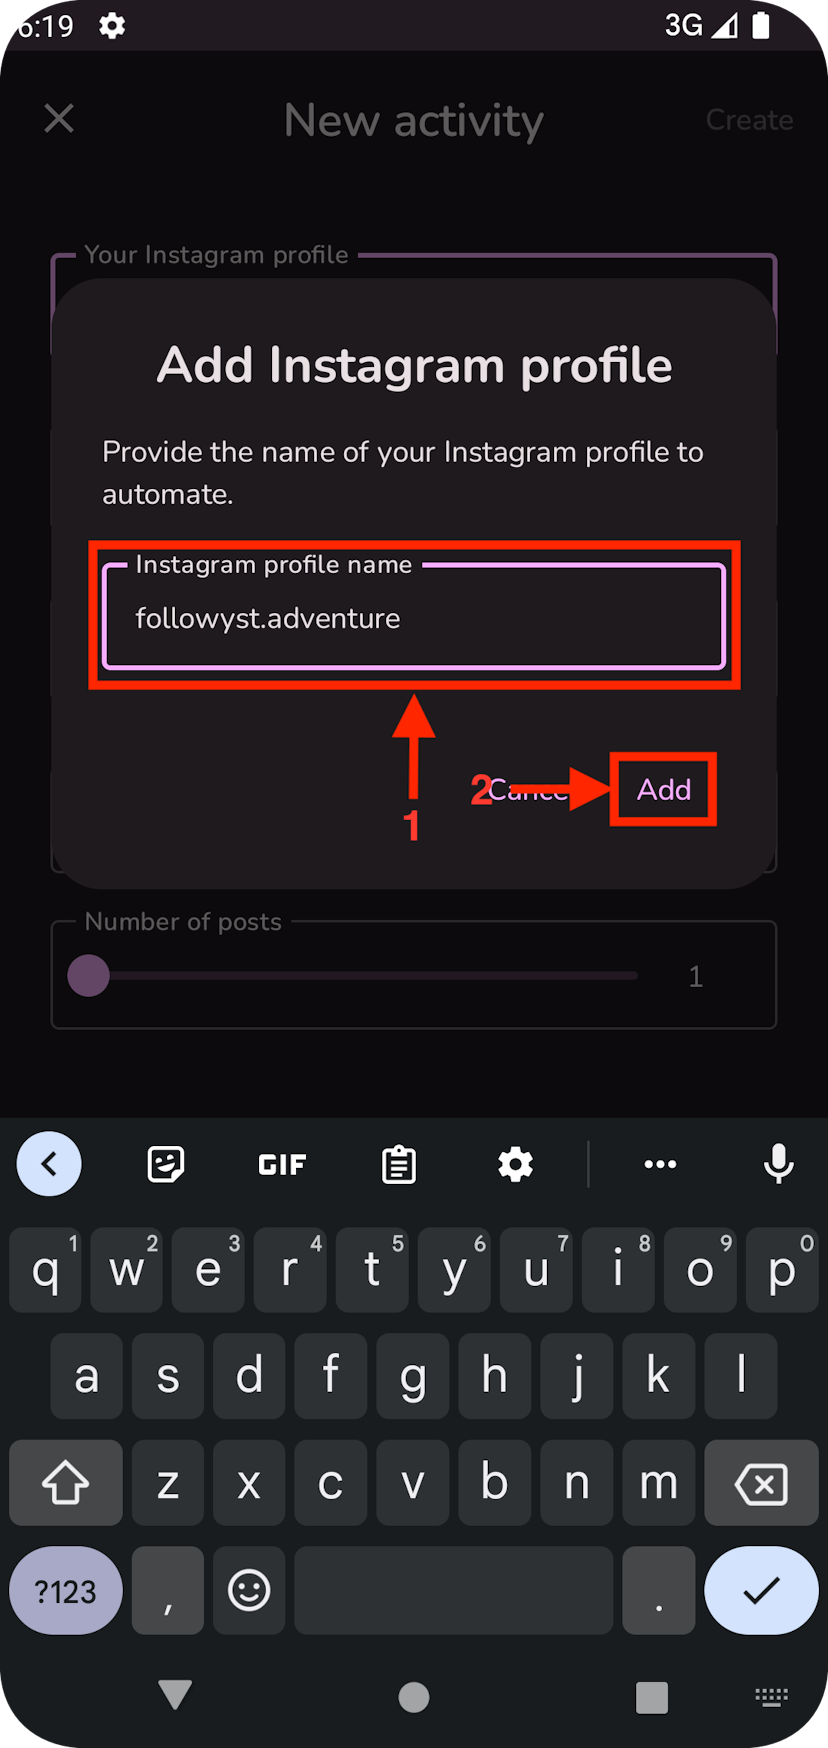 Screenshot of adding an Instagram profile in the "Add activity" dialog